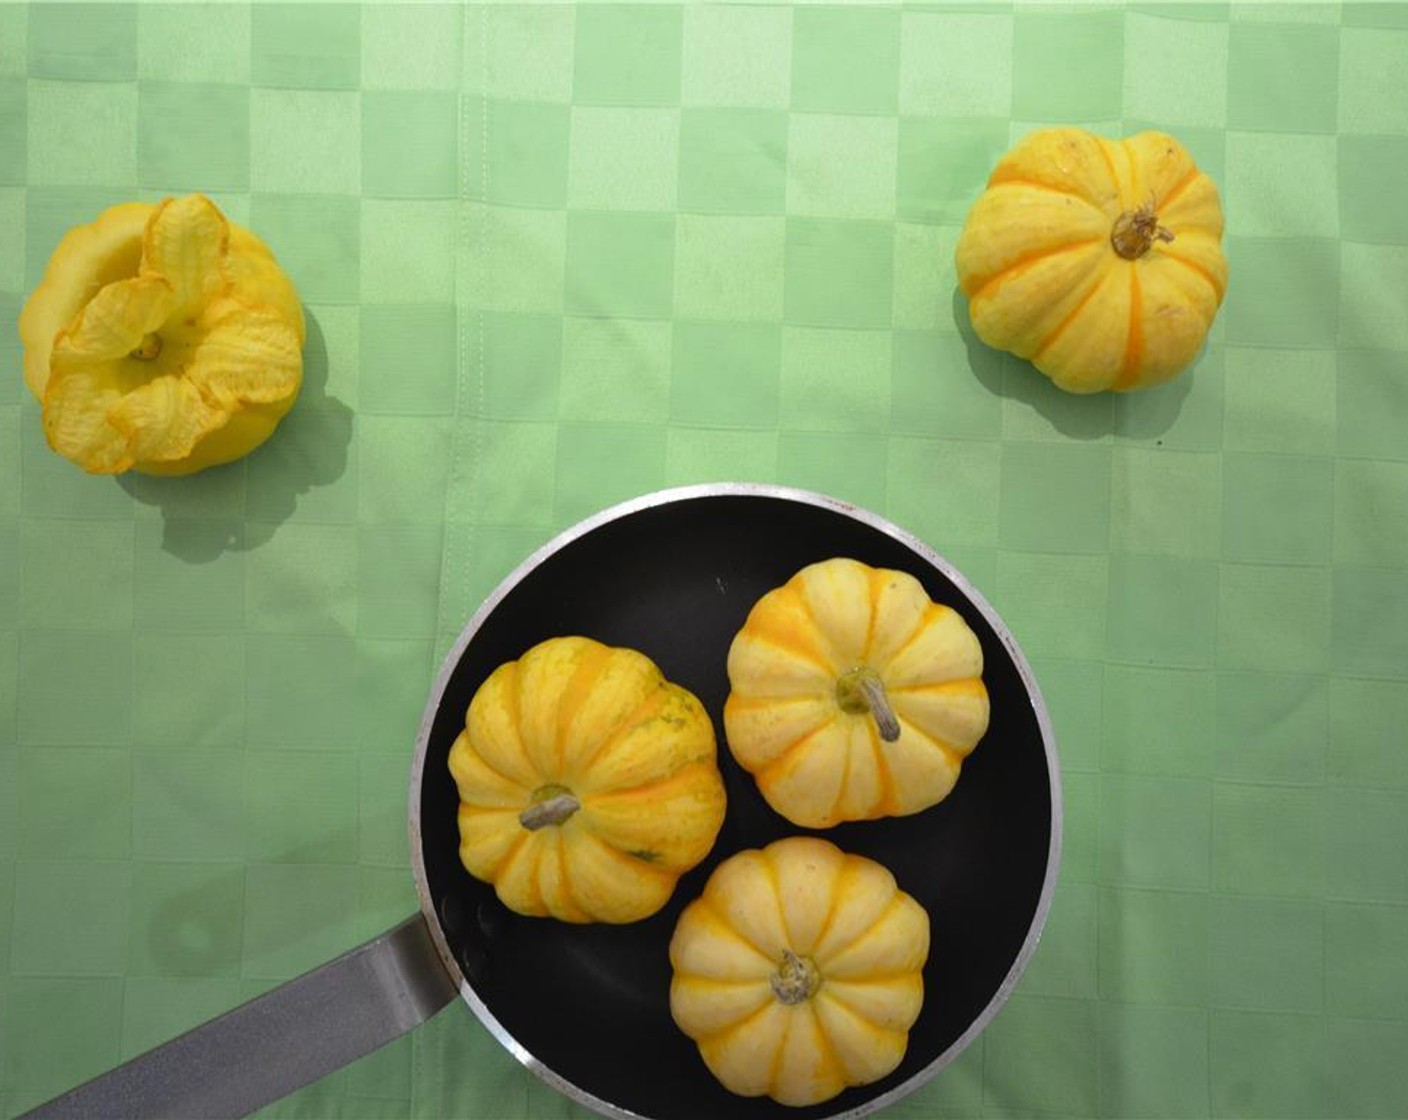 step 2 At this time, if you would like to serve the risotto in baby pumpkins, you can prepare them now. Steam the Baby Pumpkins (2) until soft. Once cooled, remove the tops and seed them. Set aside.